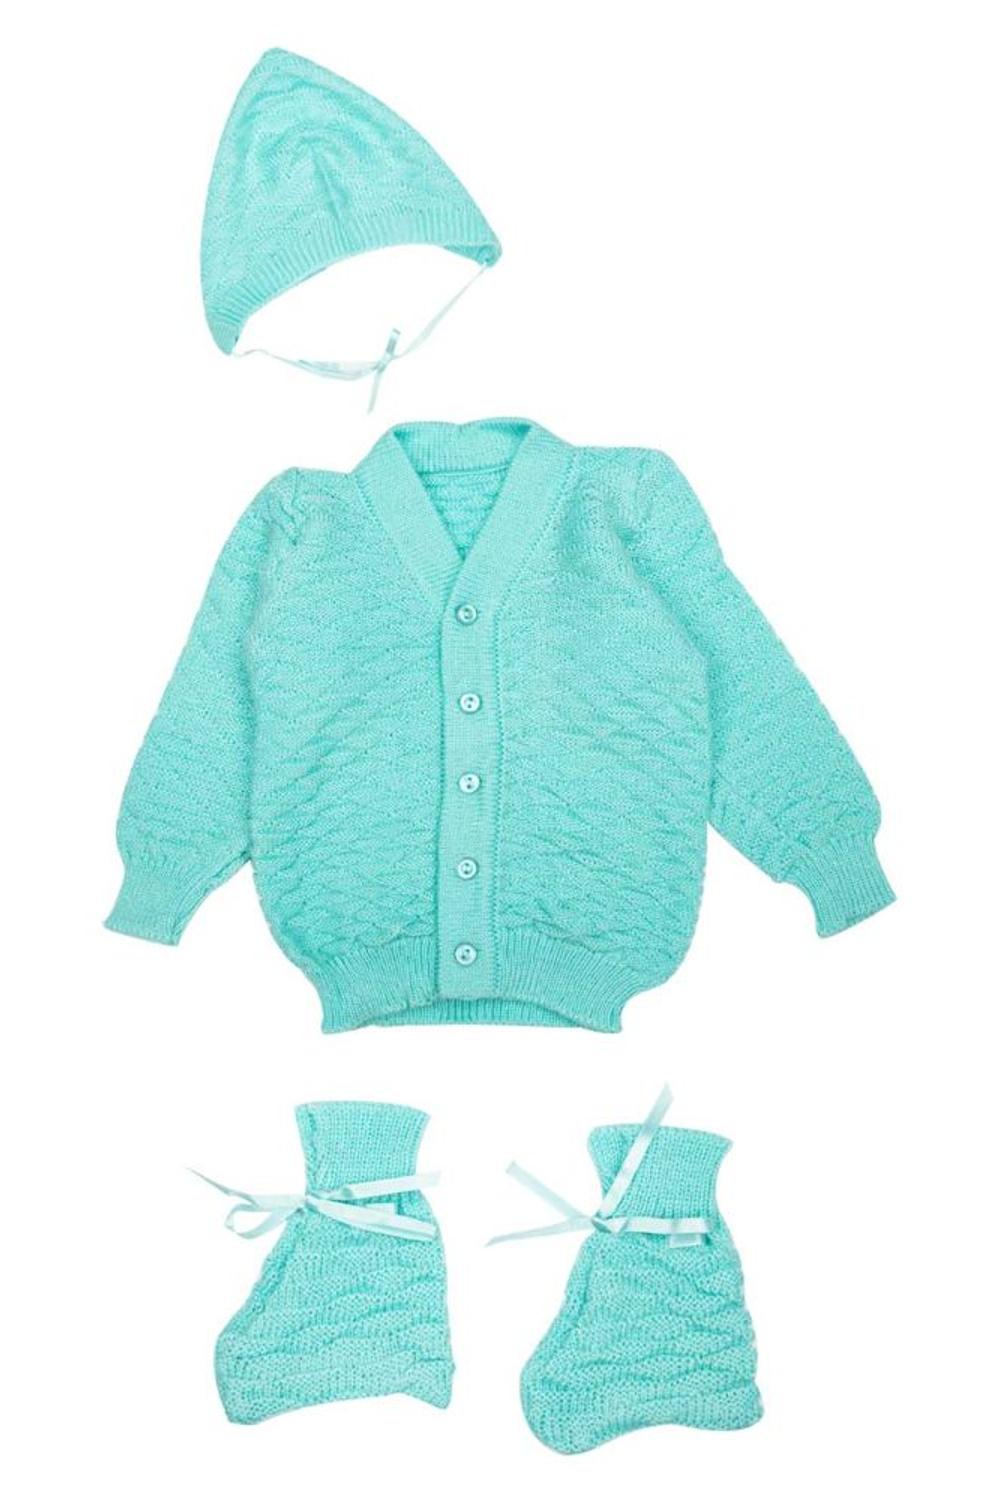 Mee Mee Baby Sweater Sets (Green)